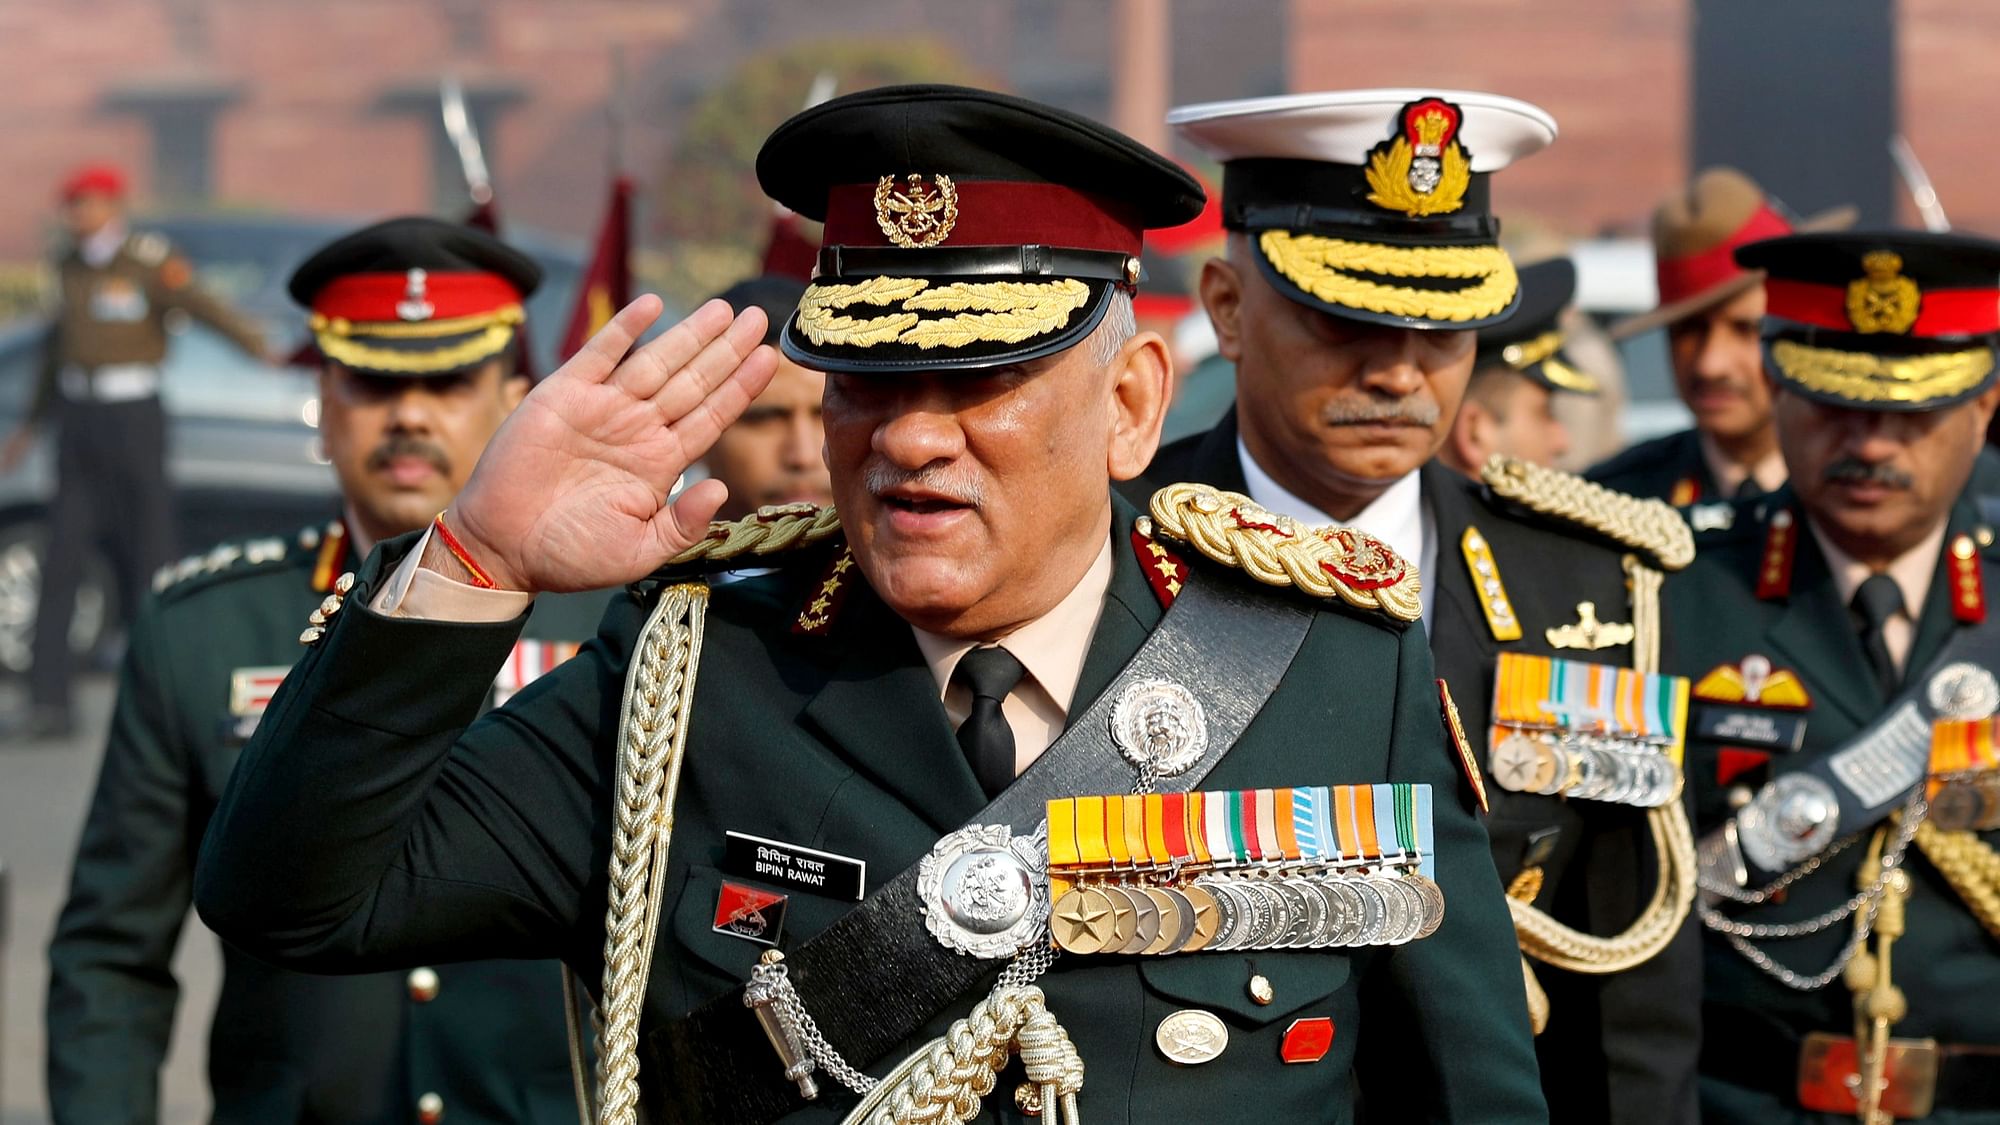 Newly appointed Chief of Defense Staff (CDS) General Bipin Rawat arrives for a joint military guard of honor after assuming office in New Delhi, India